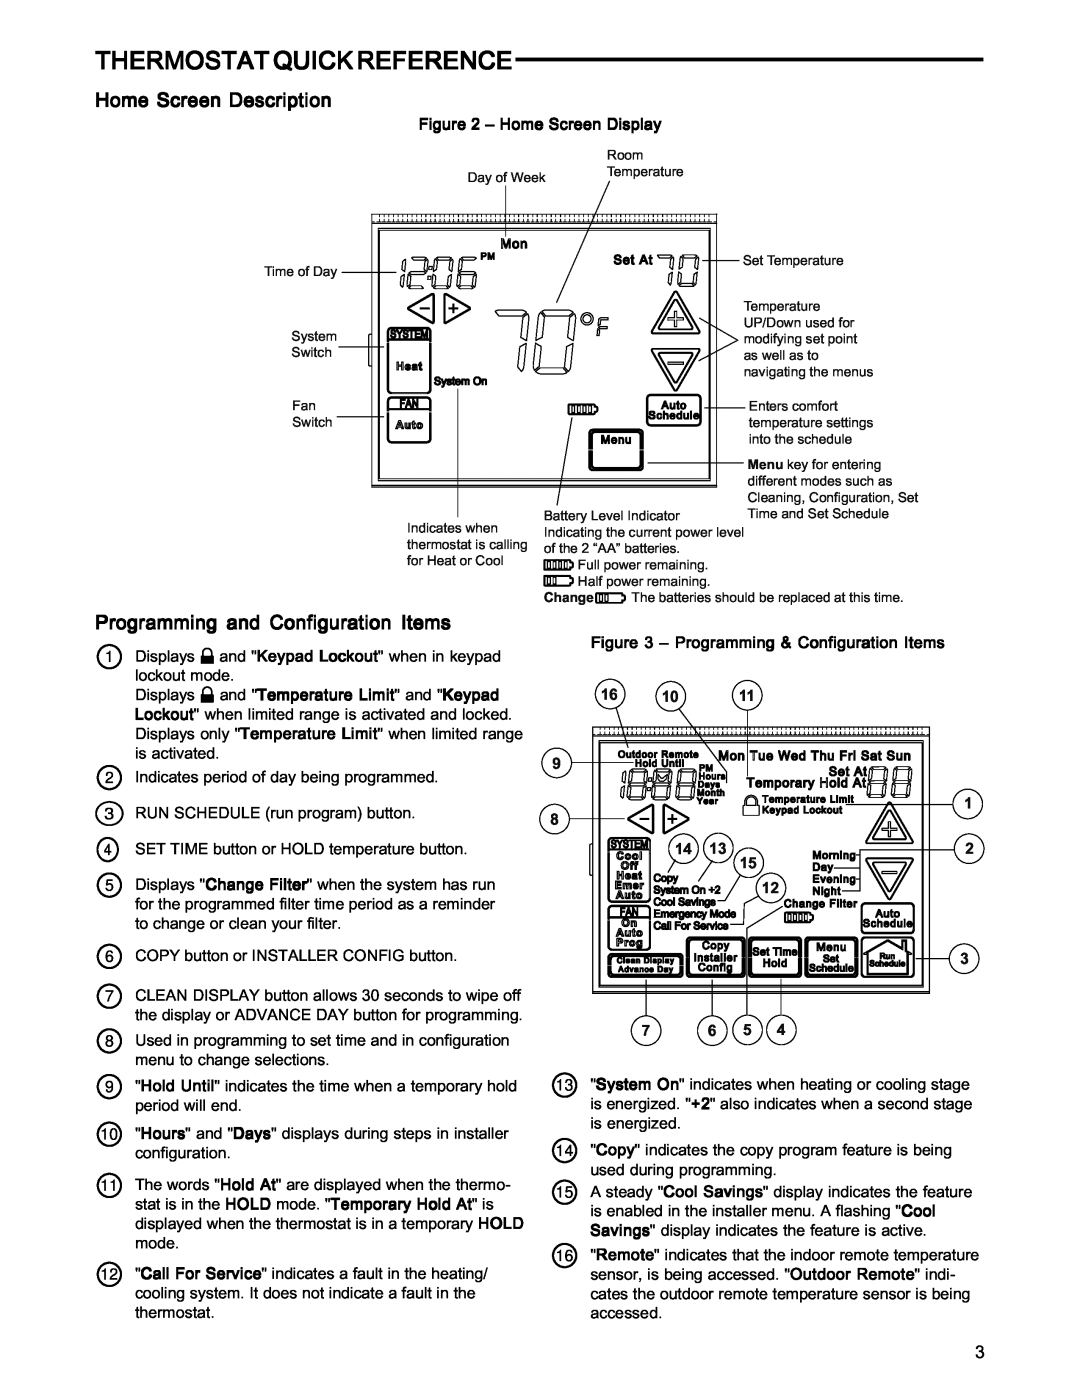 White Rodgers 37-6753B Thermostat Quick Reference, Home Screen Description, Programming and Configuration Items 